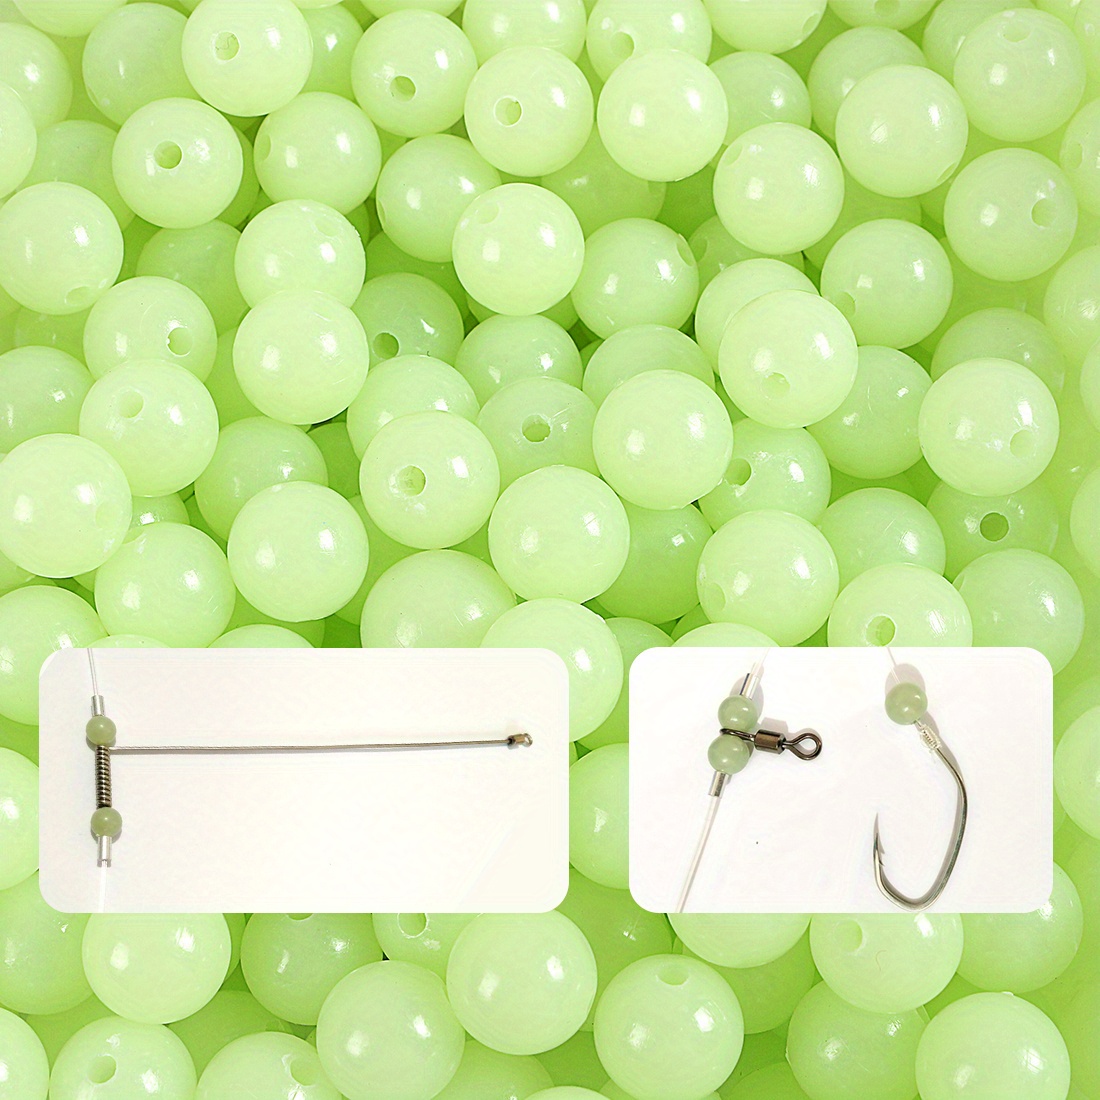 What are Fishing Lumo Beads Used for? - Fishing Outlet